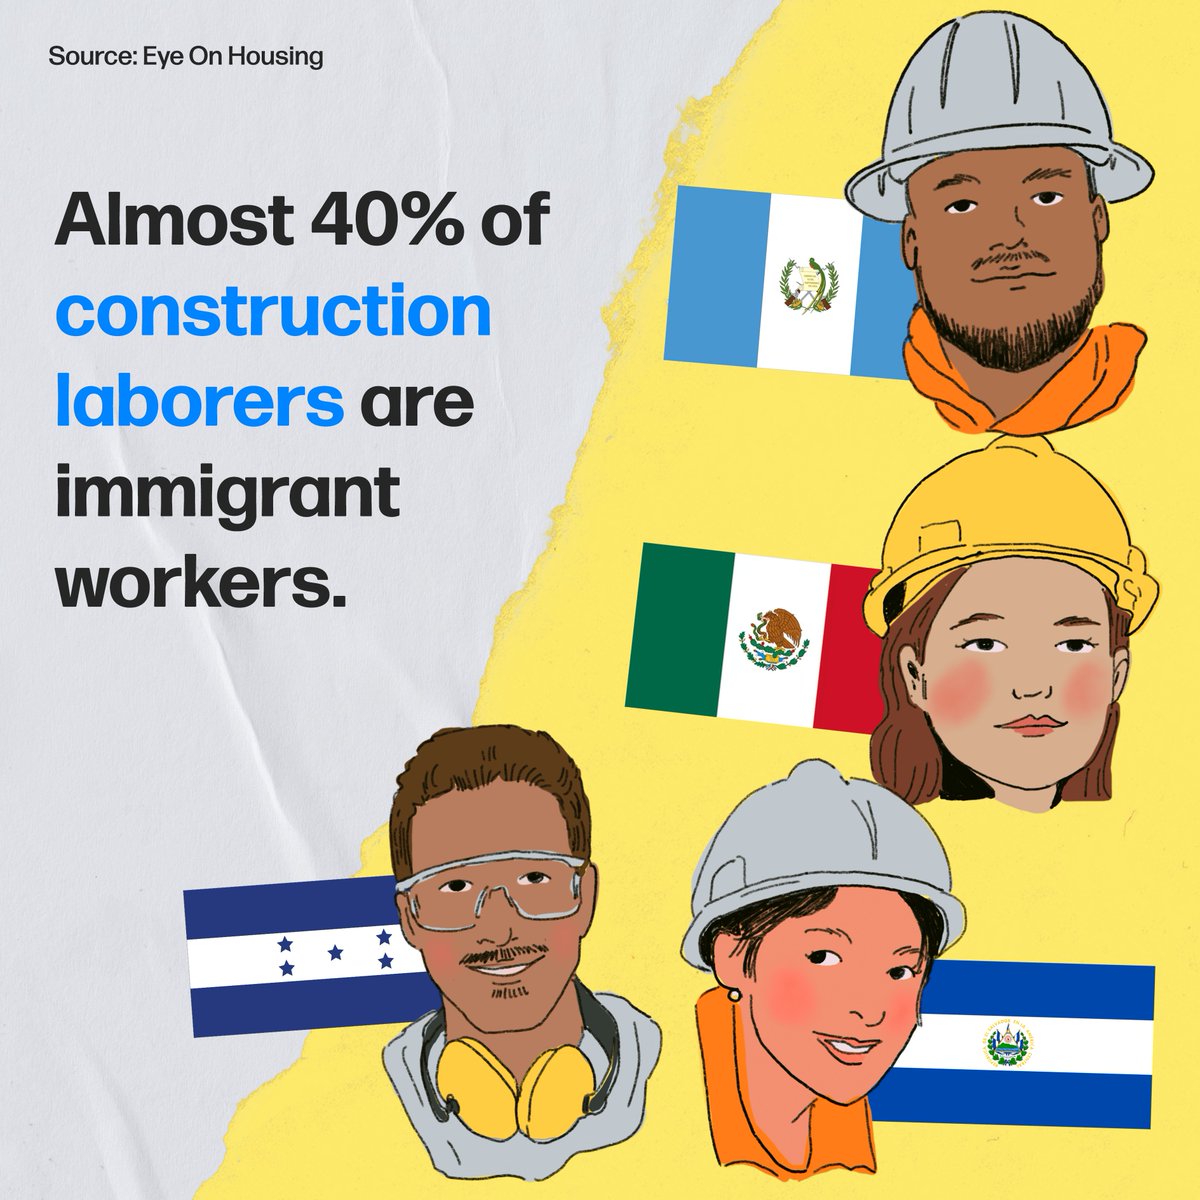 🏗️ Did you know? 40% of construction laborers in the US are immigrants. Their hard work and dedication are the foundation of our infrastructure. The Key Bridge tragedy underscores their essential role in our society.